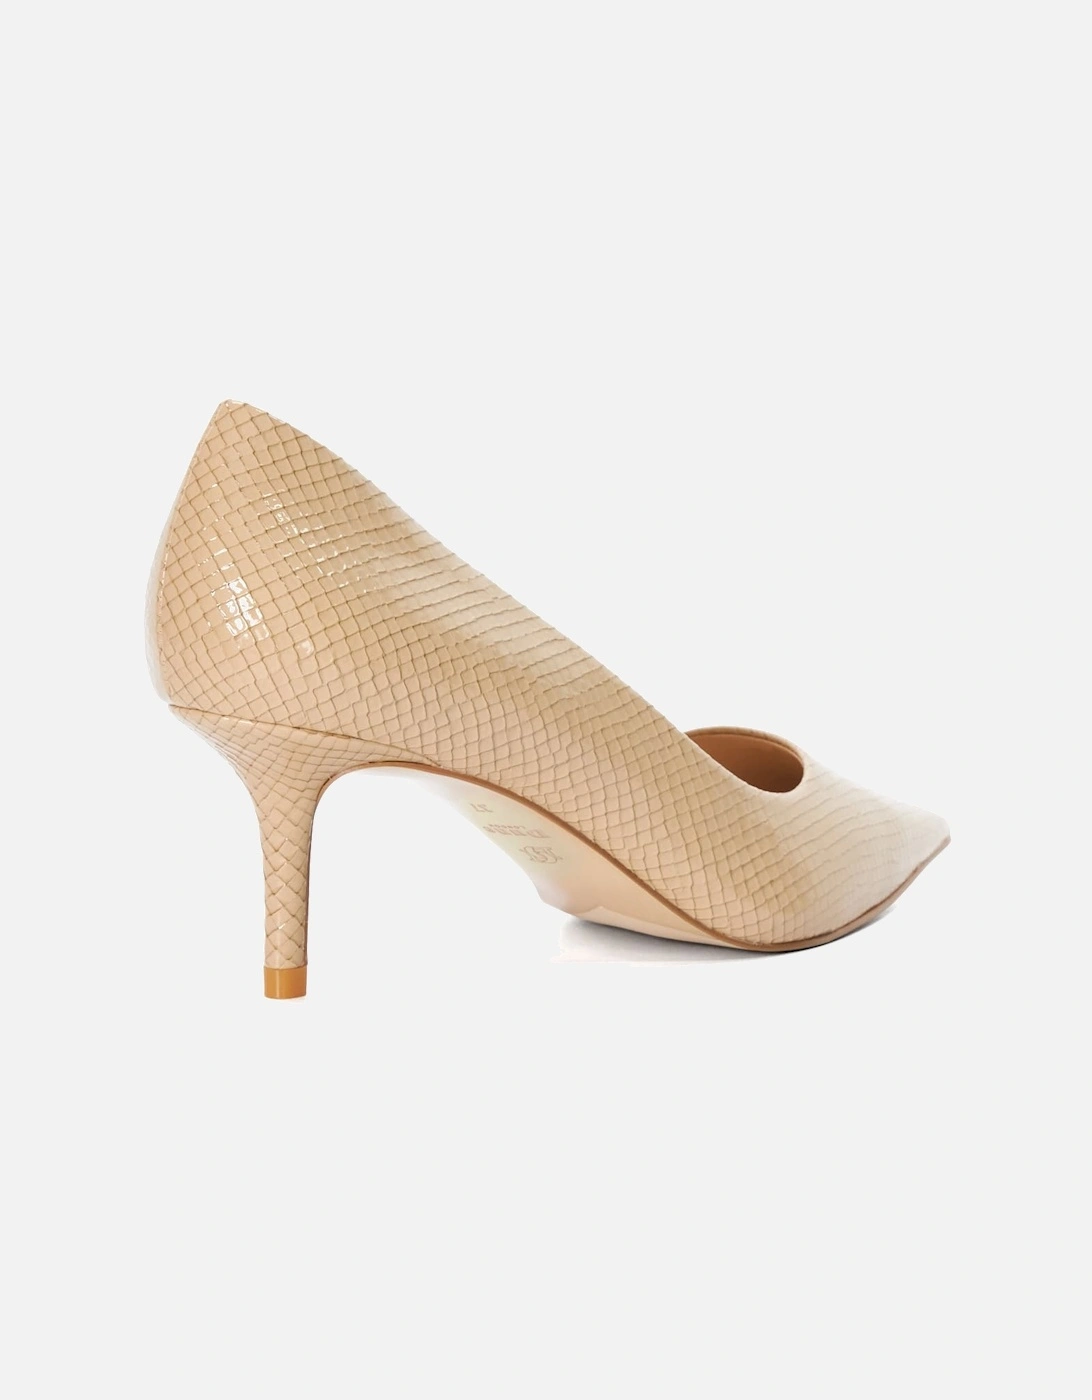 Ladies Absolute - Heeled Court Shoes